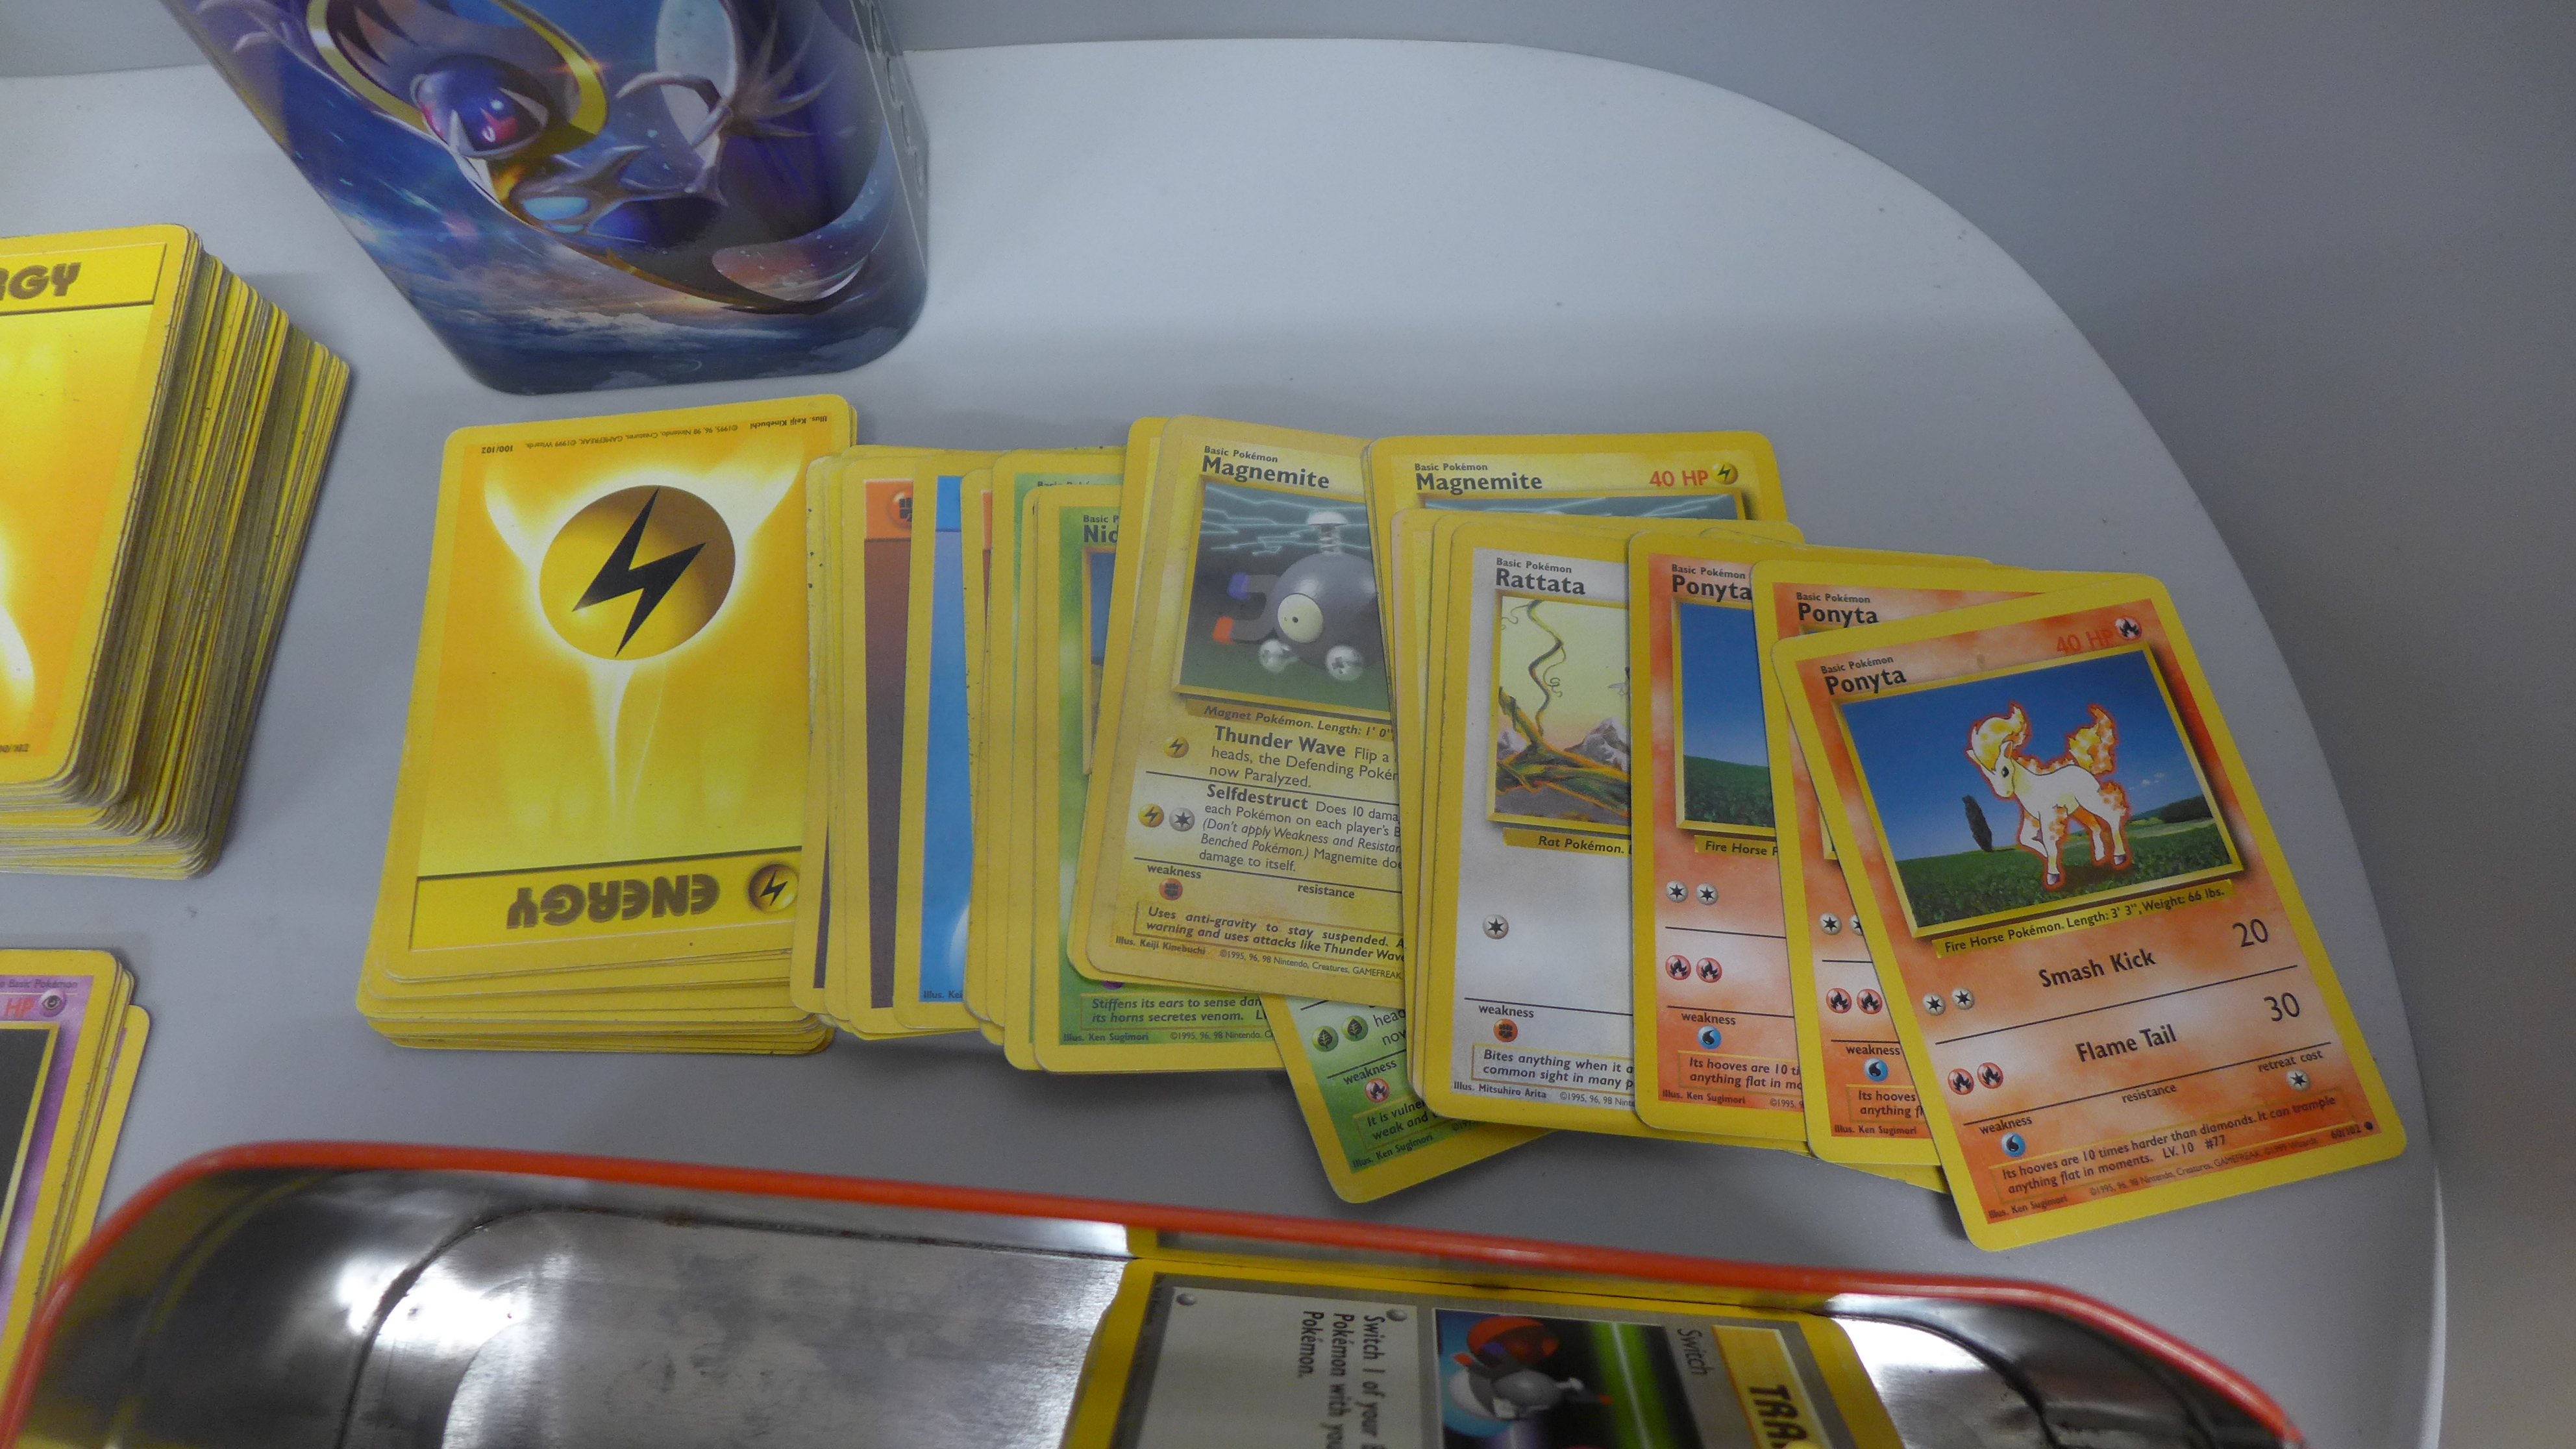 700 Pokemon base set cards including collector tins and book, etc. - Image 3 of 3